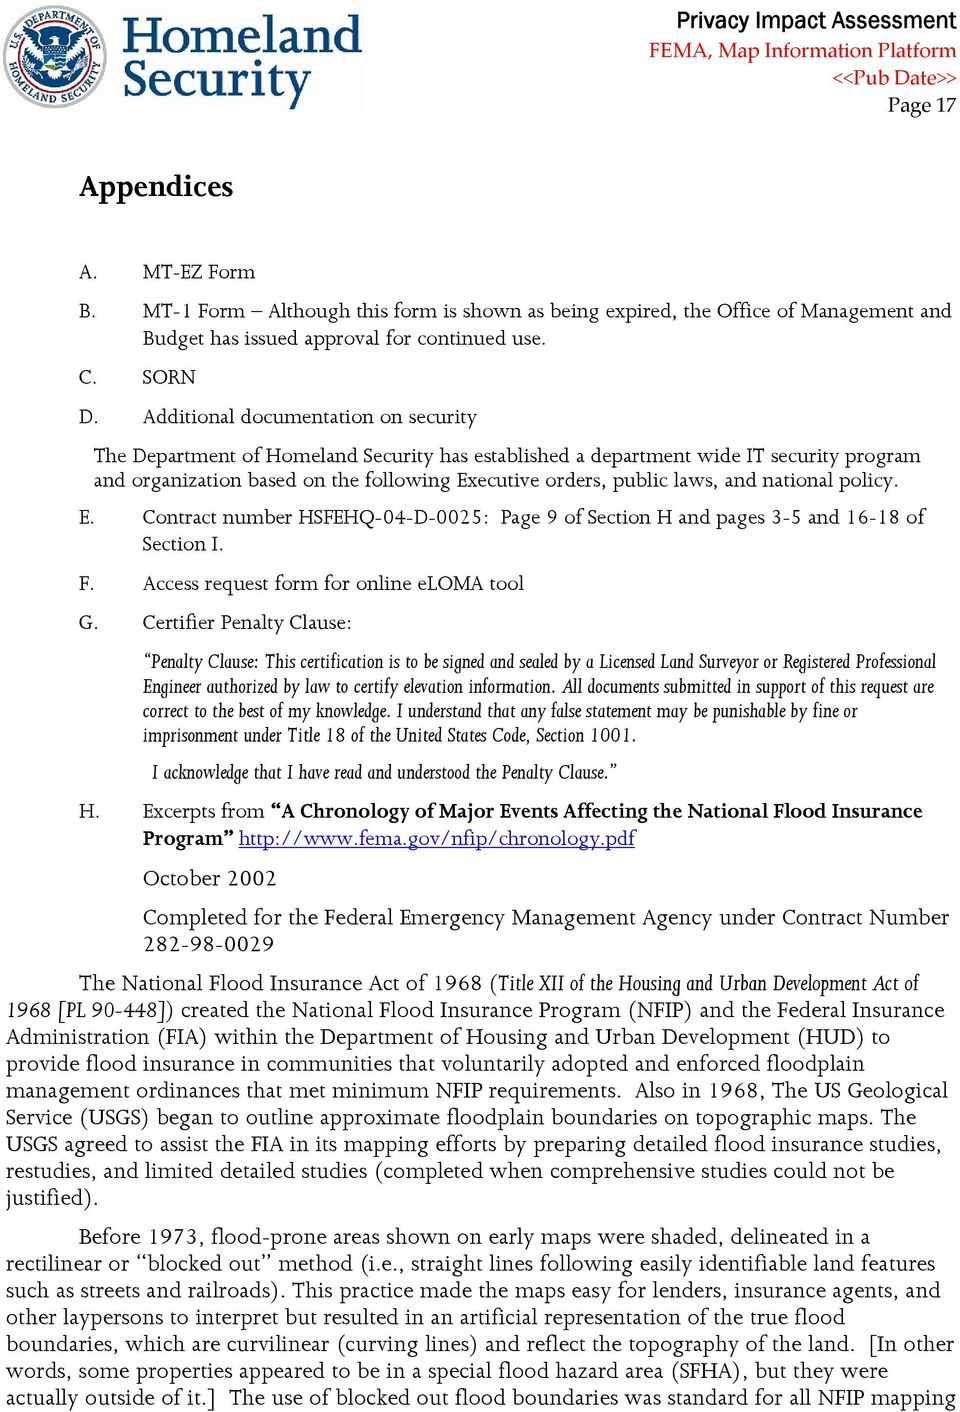 and national policy. E. Contract number HSFEHQ-04-D-0025: Page 9 of Section H and pages 3-5 and 16-18 of Section I. F. Access request form for online eloma tool G.